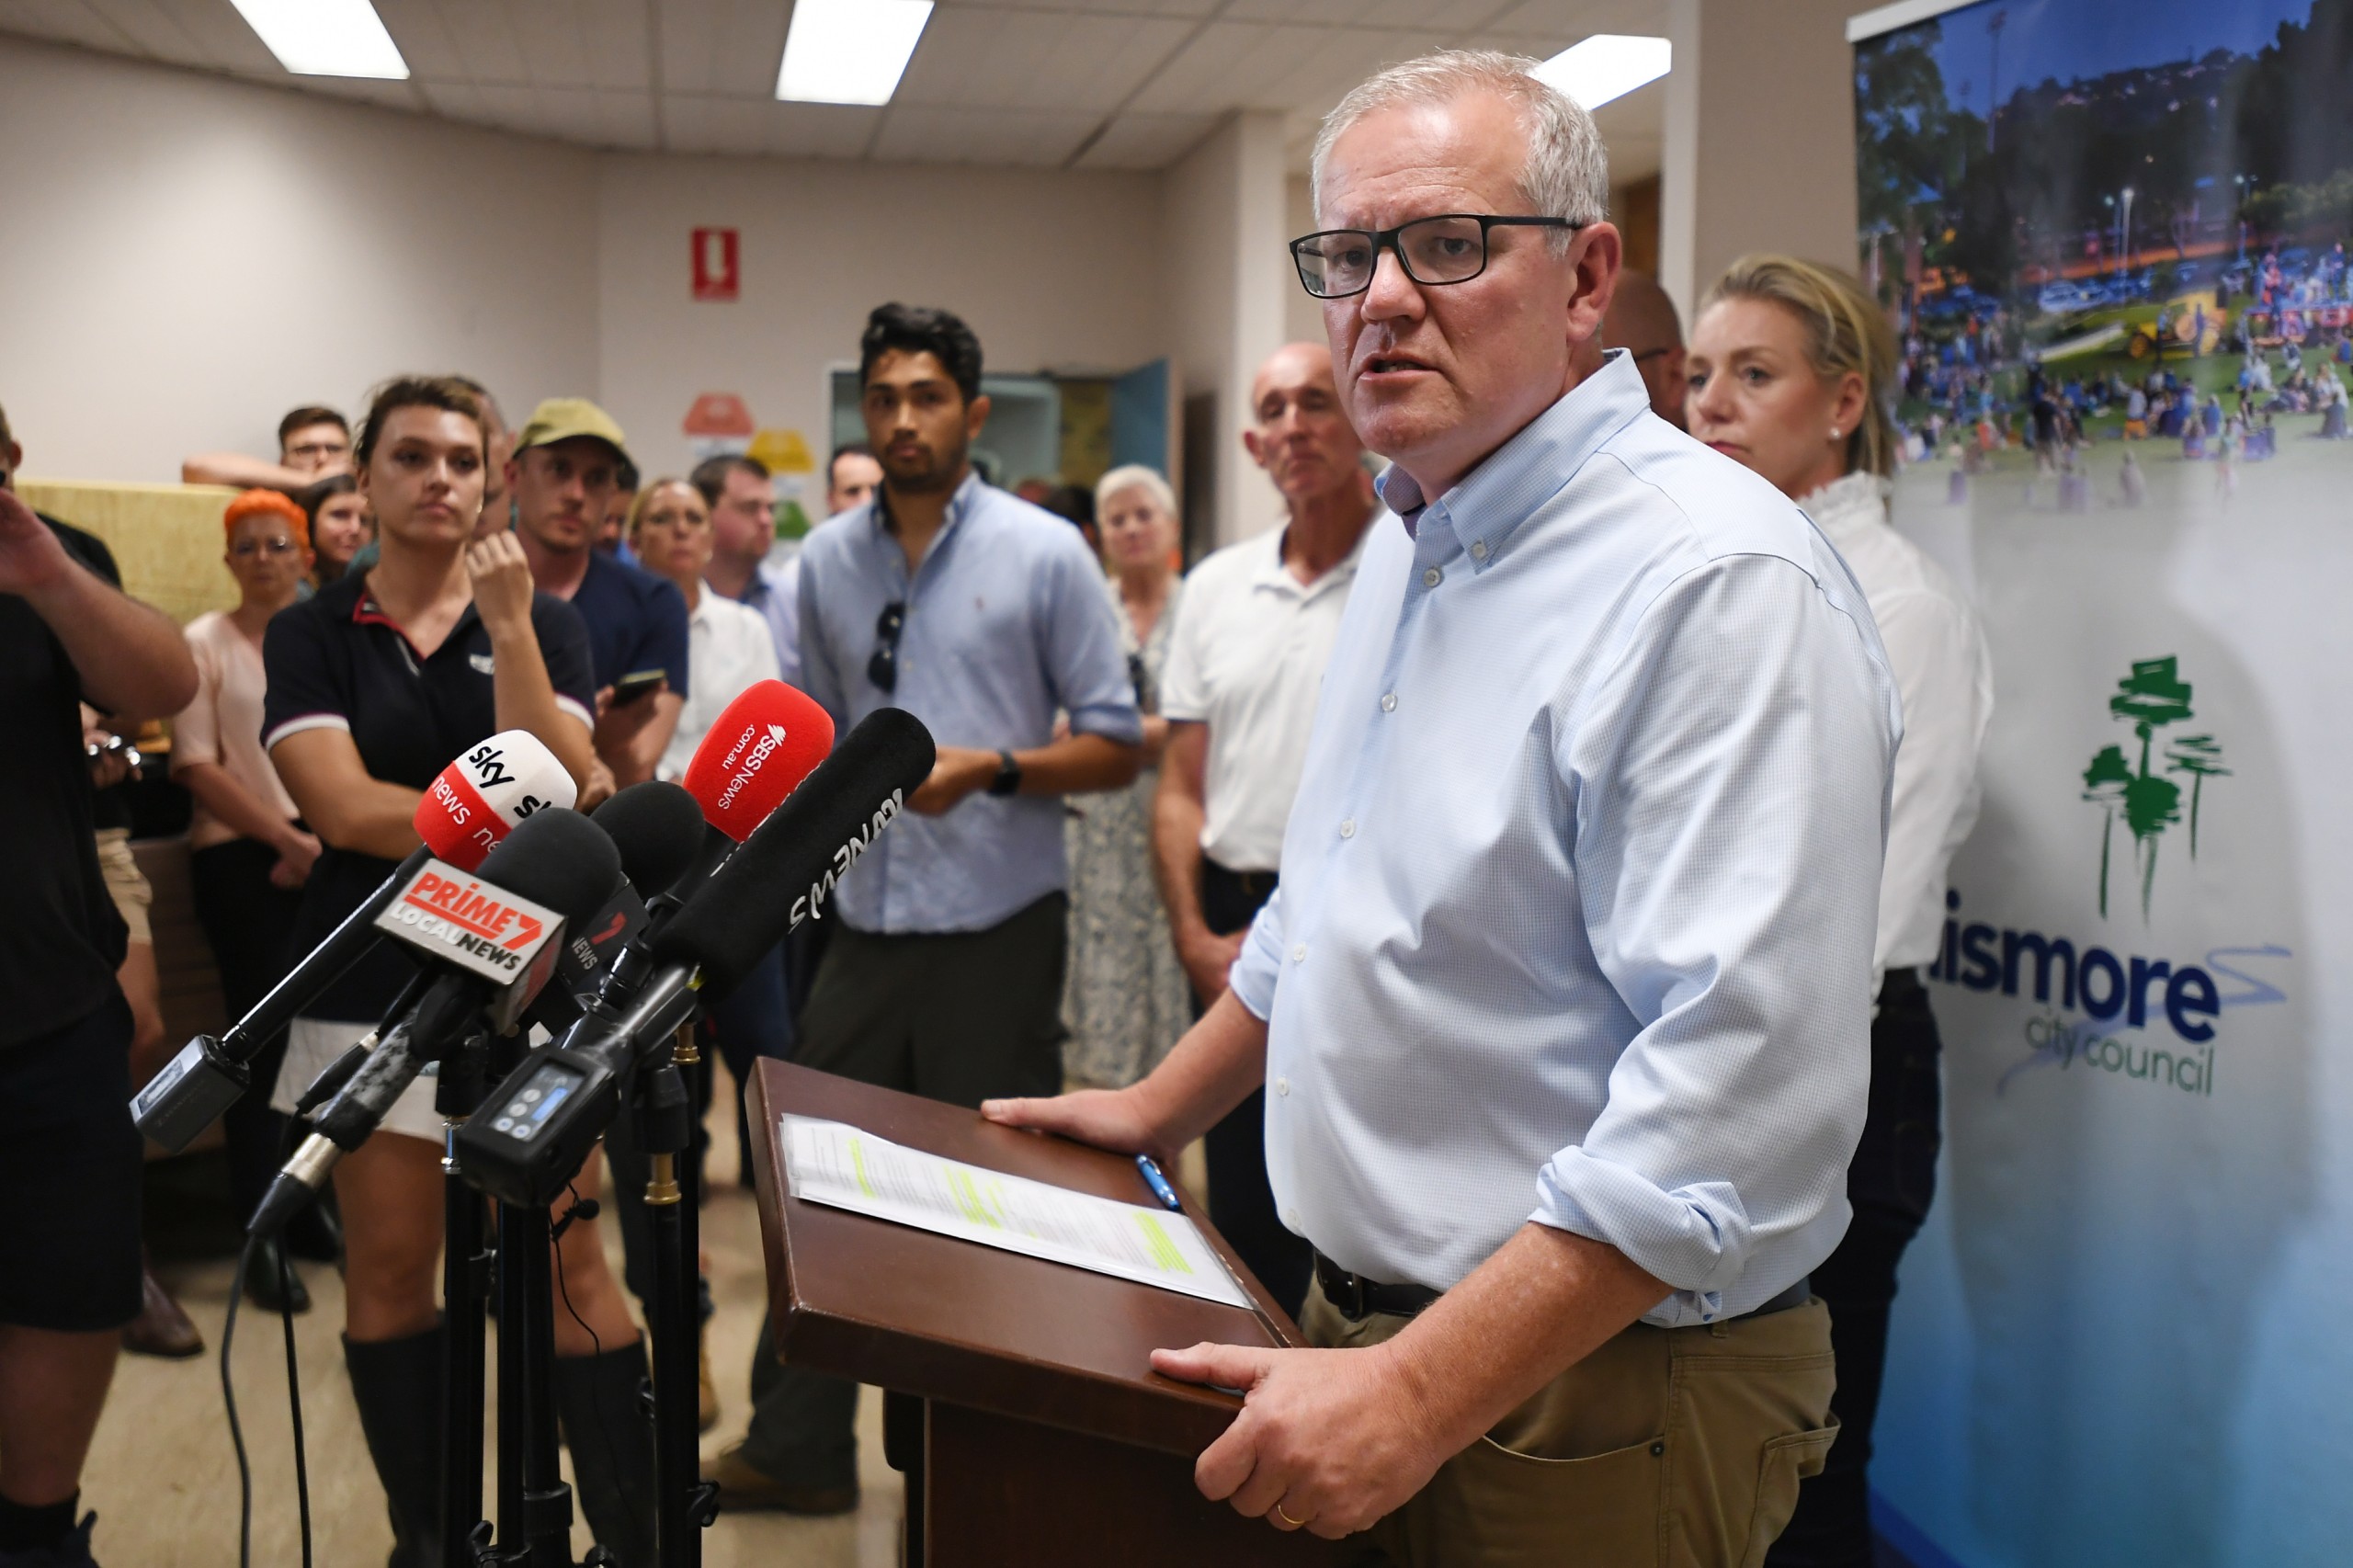 epa09811856 Prime Minister Scott Morrison holds a press conference following a visit to the Emergency Operations Centre in Lismore, NSW, Australia, 09 March 2022. Prime Minister Scott Morrison has visited flood devastated regions in northern NSW after finishing a week in isolation following his COVID-19 diagnosis.  EPA/DAVE HUNT AUSTRALIA AND NEW ZEALAND OUT